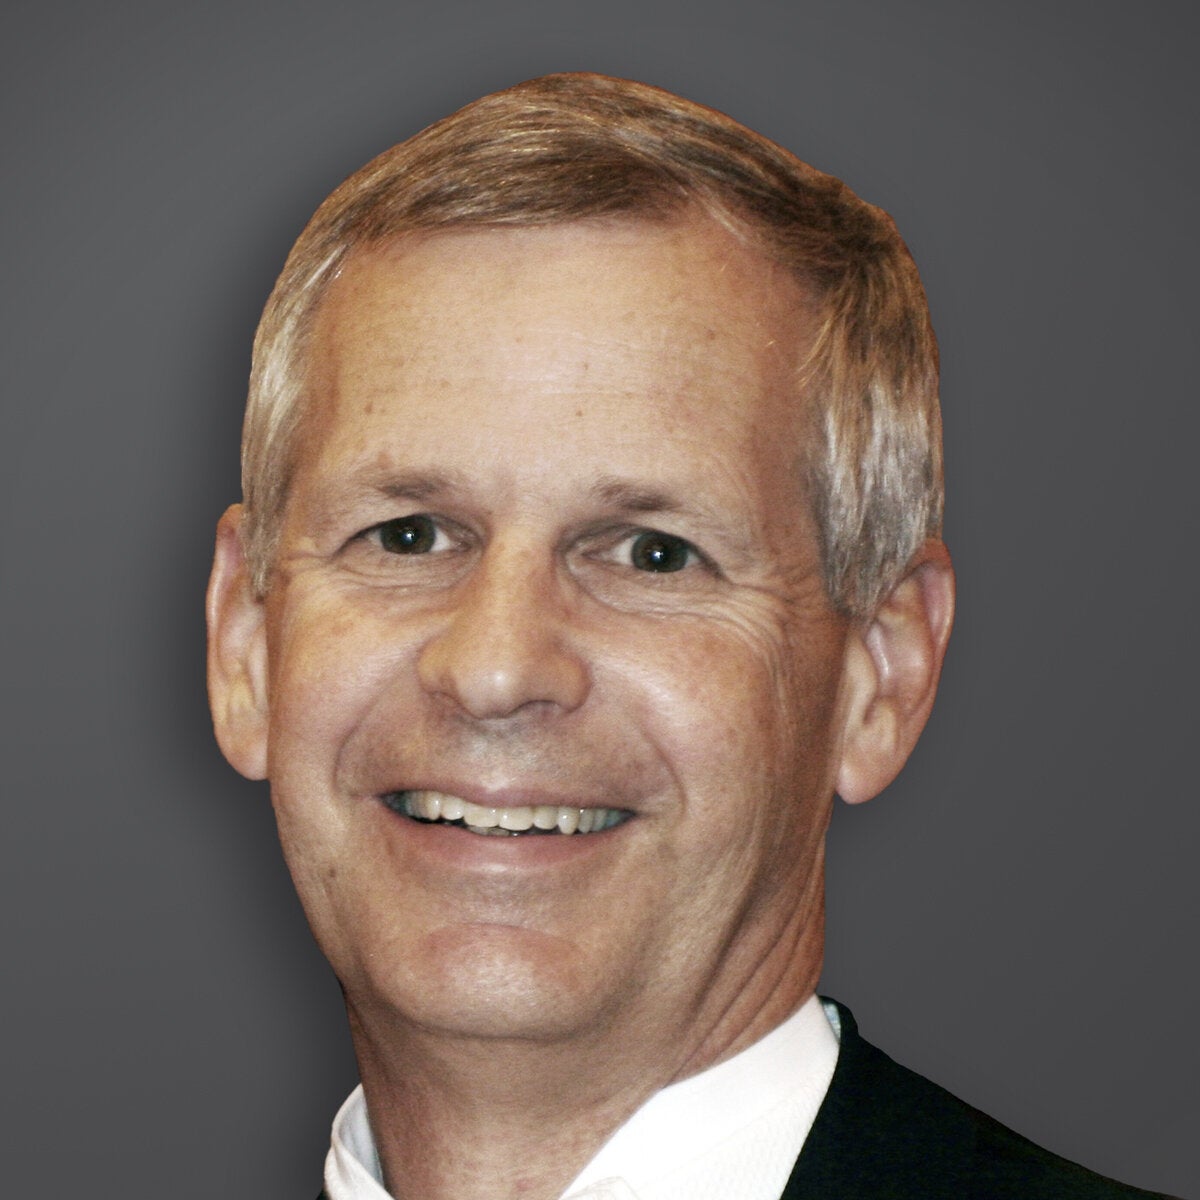 Dish Chairman Charles Ergen will finally have his dreams realized - Dish, Deutsche Telekom reportedly agree on asset sale allowing T-Mobile-Sprint merger to close